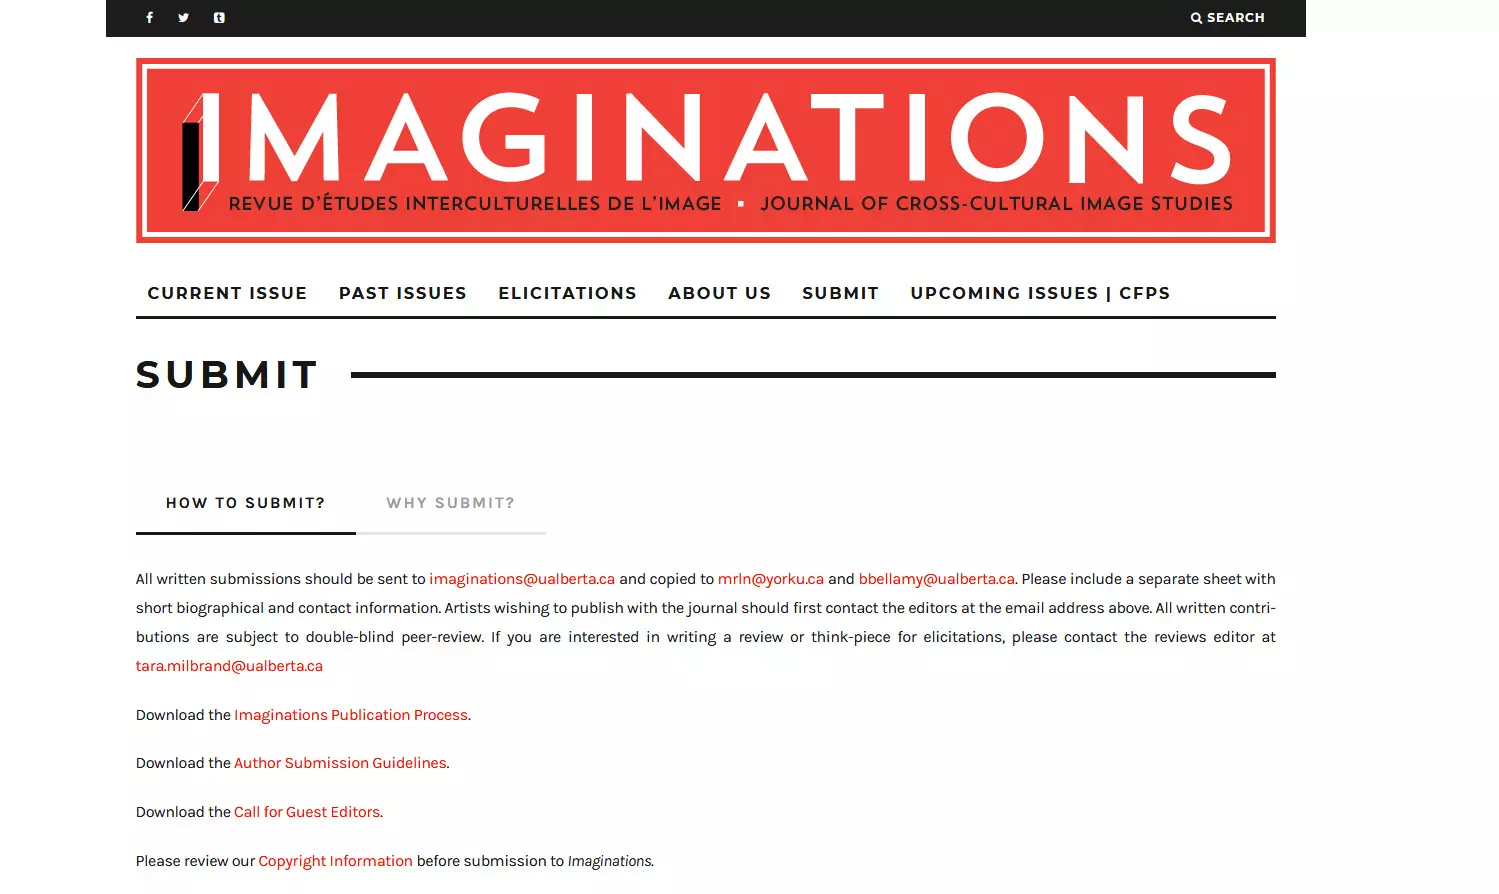 CFP: Critical and Creative Engagements with Petro-Media / special issue of Imaginations  SUBMISSION DEADLINE: DECEMBER 10, 2020